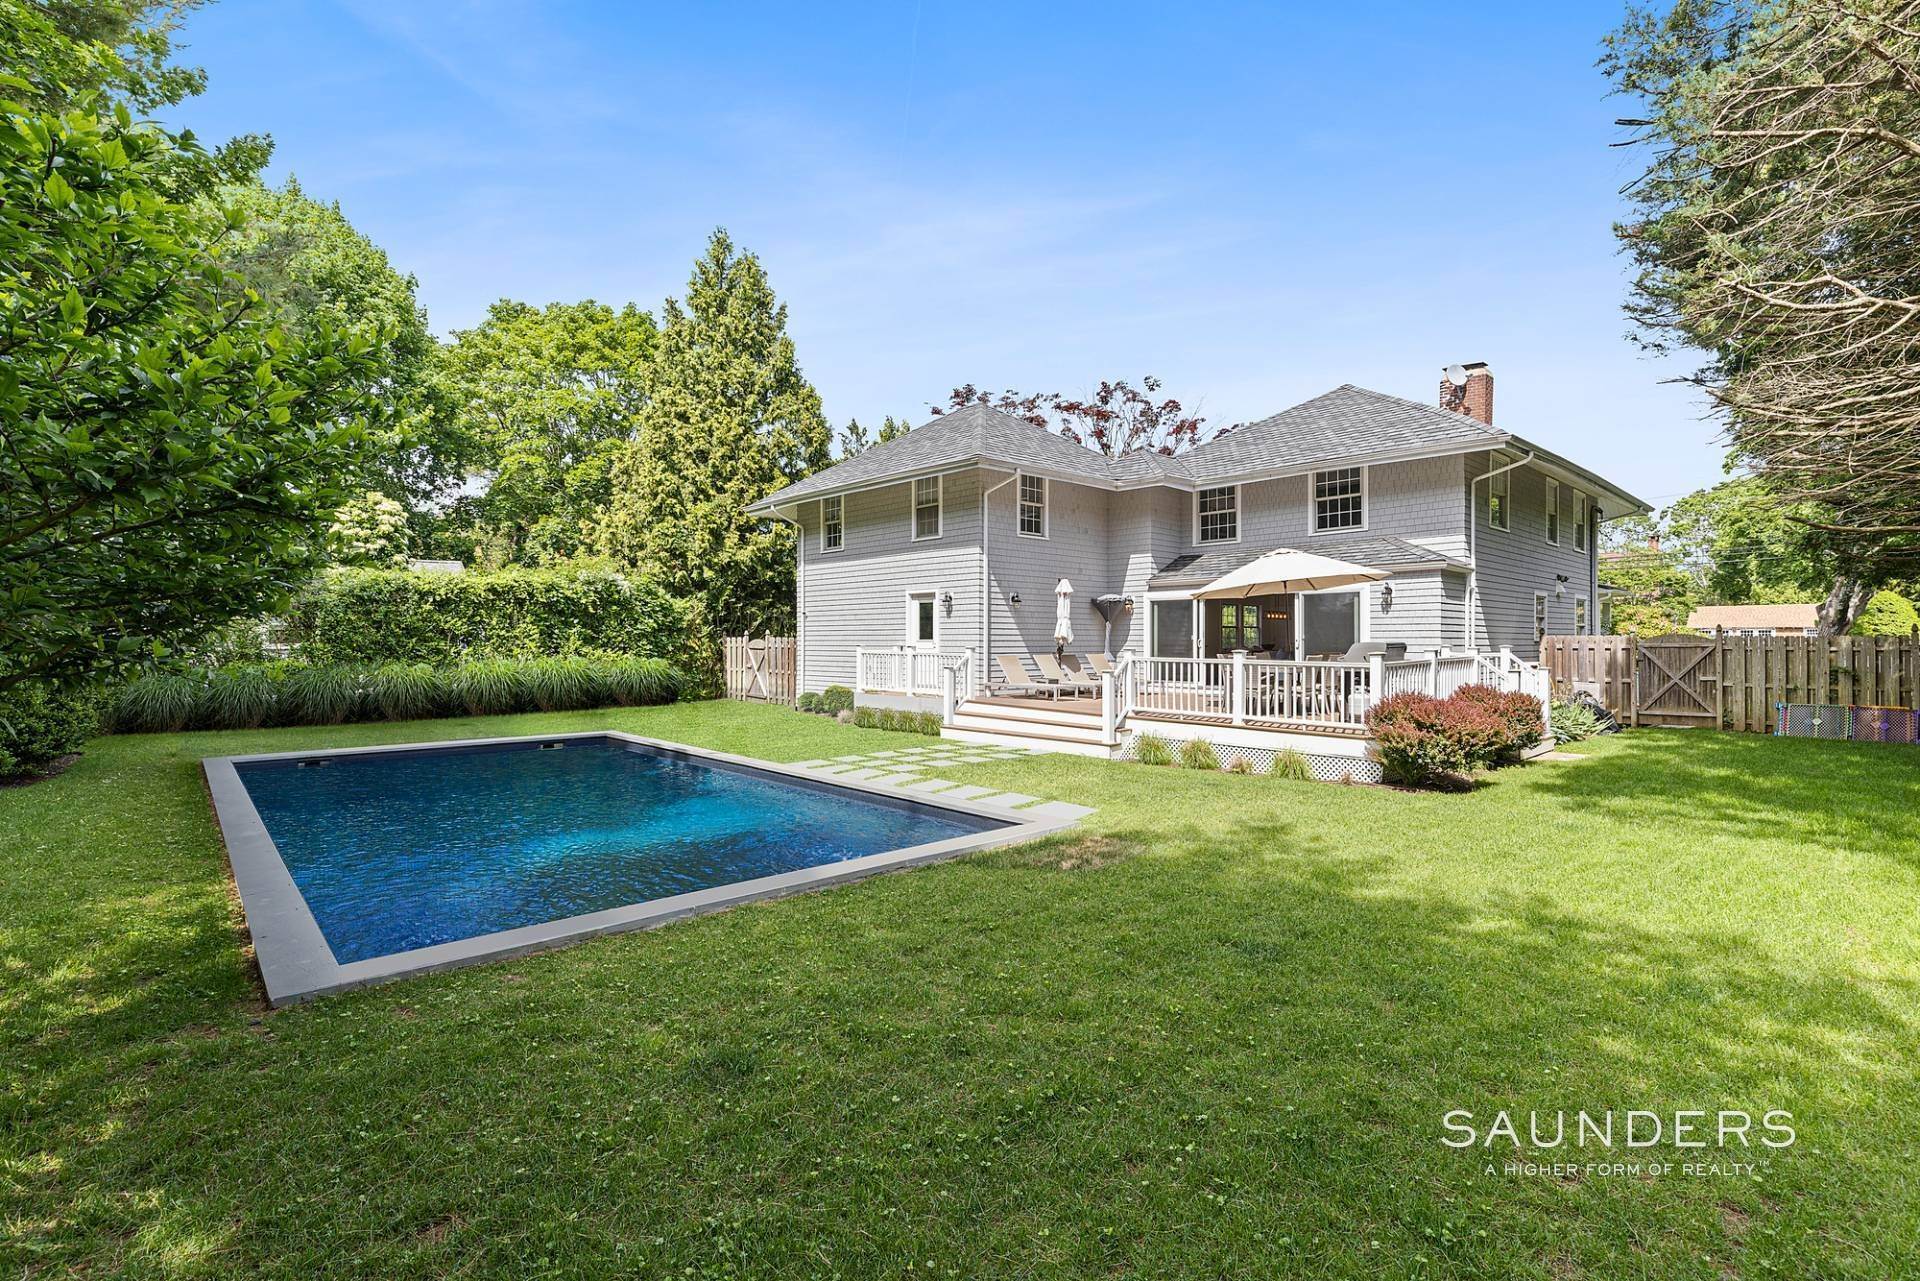 21. Single Family Homes for Sale at Renovated 1920's Farm House In The Village 25 Woodland Avenue, Westhampton Beach Village, NY 11978